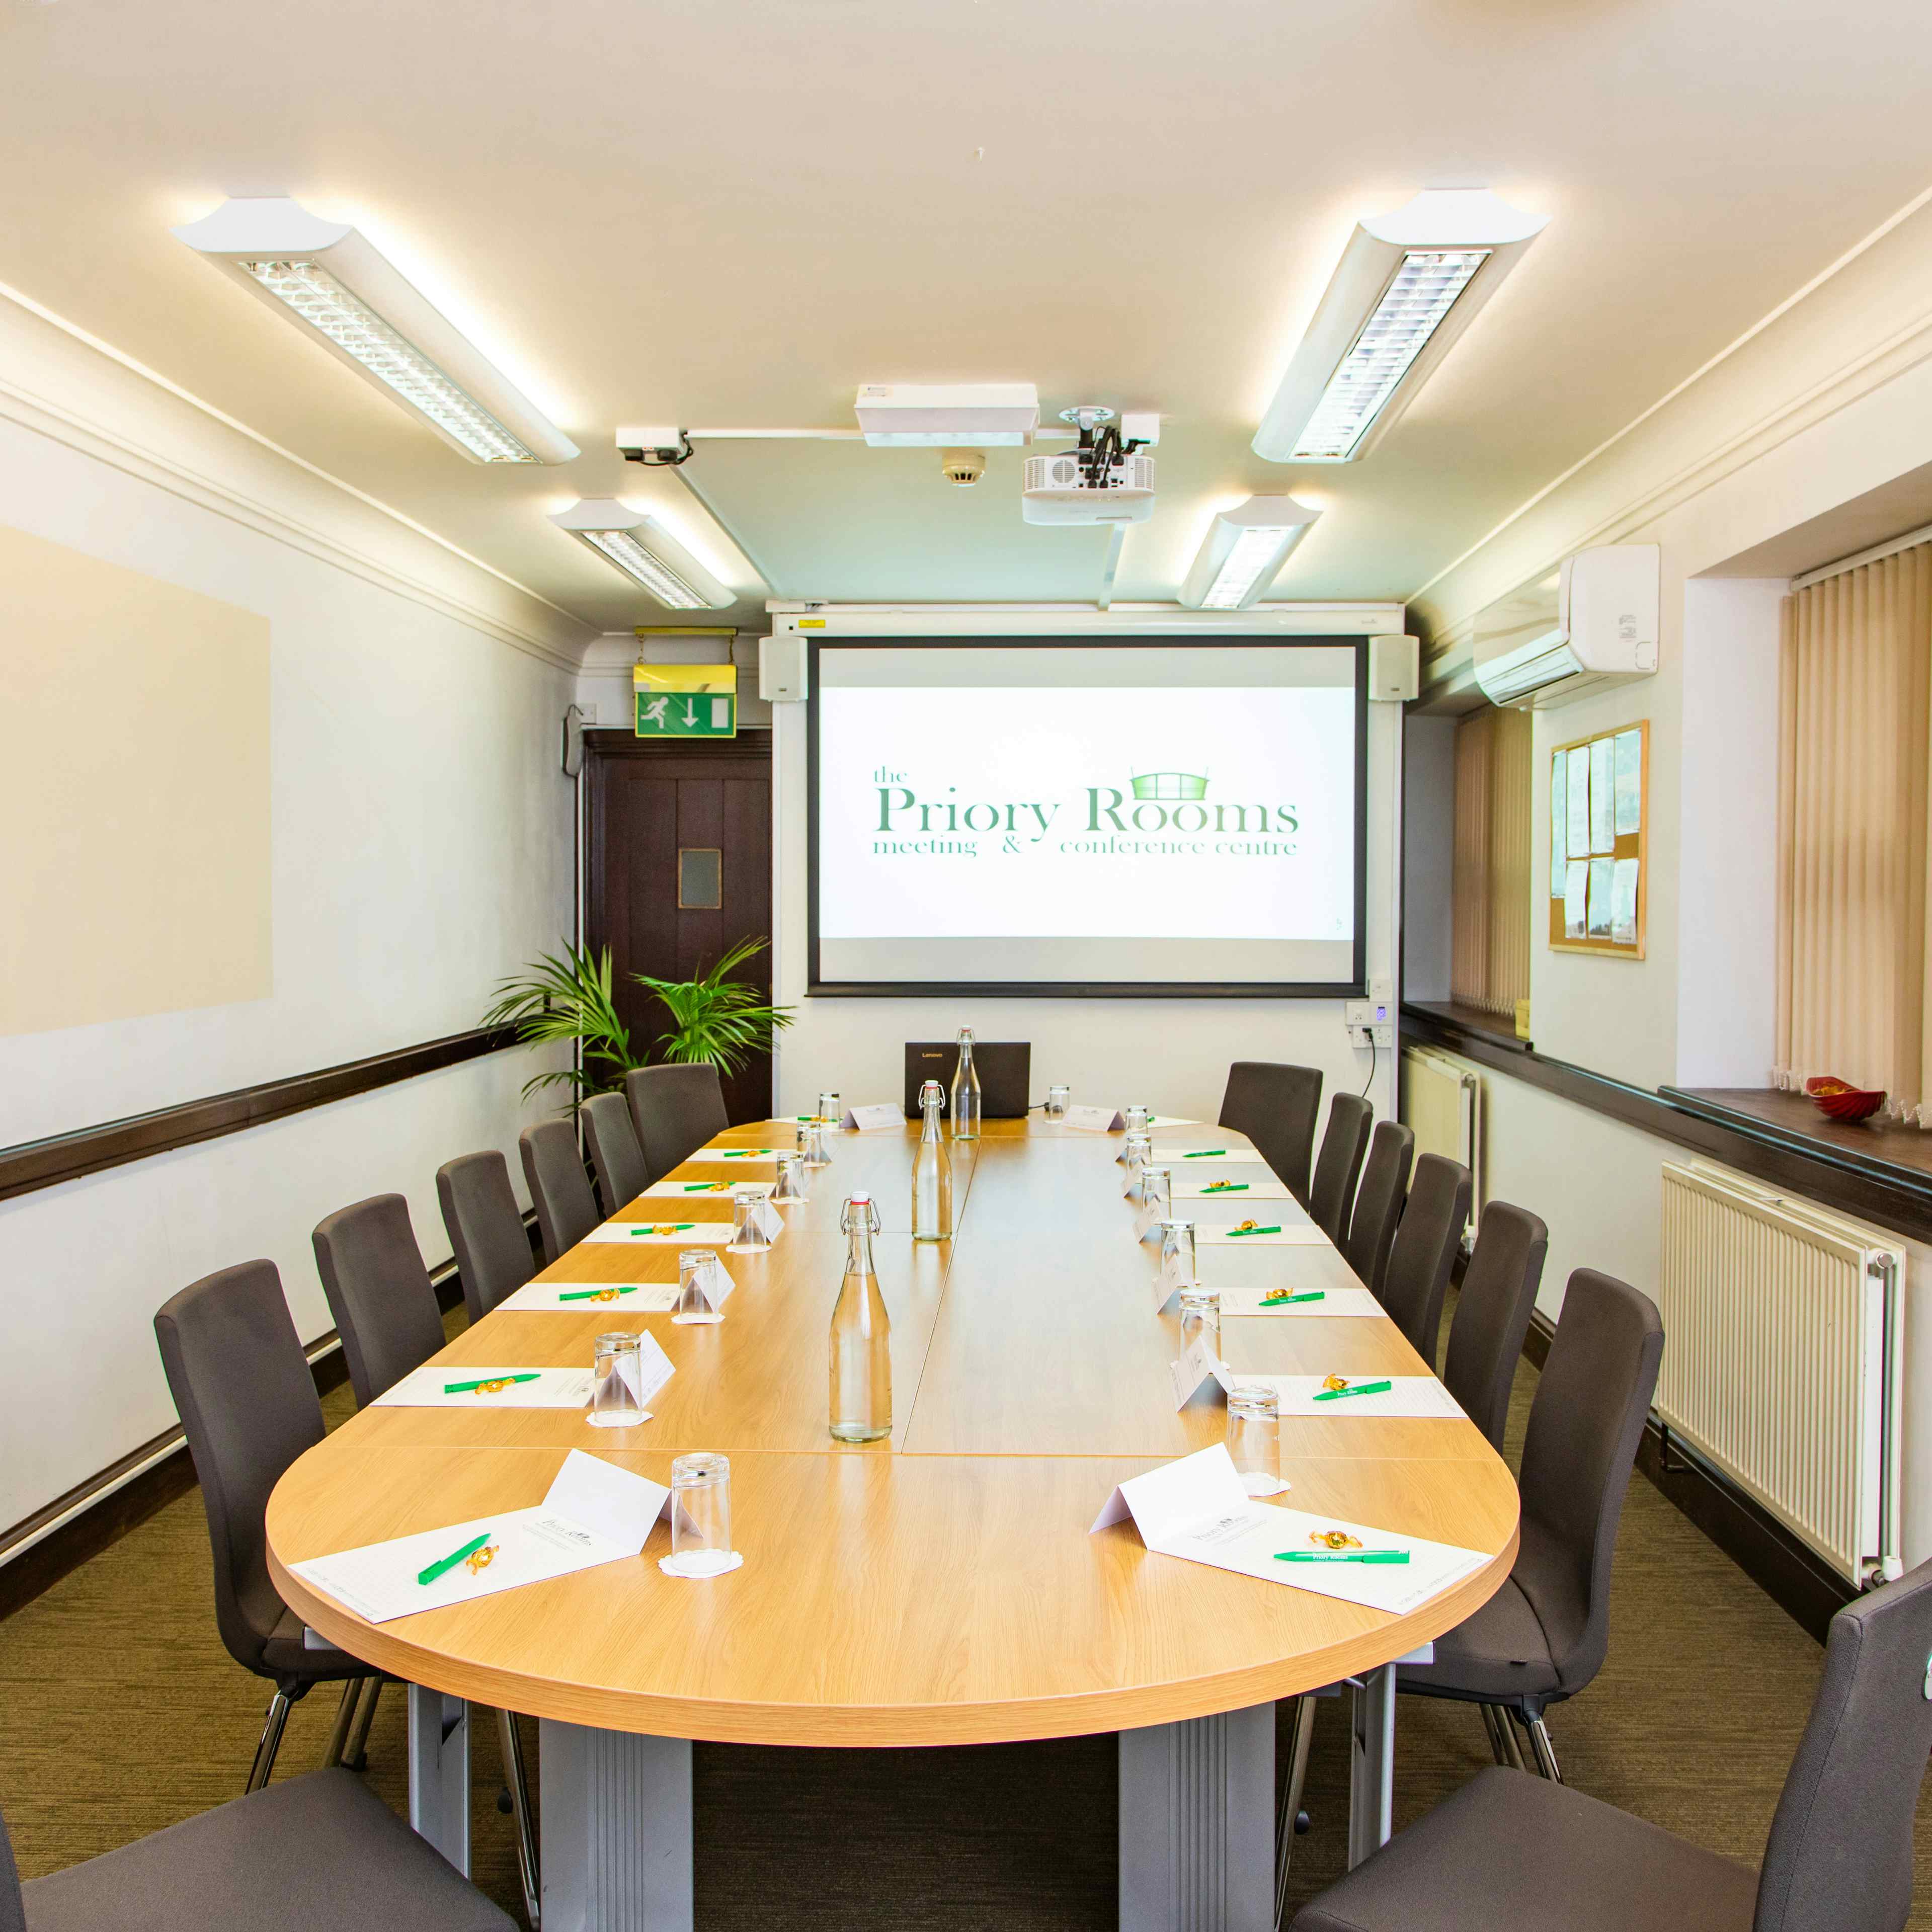 The Priory Rooms Meeting and Conference Centre  - Lloyd room image 2